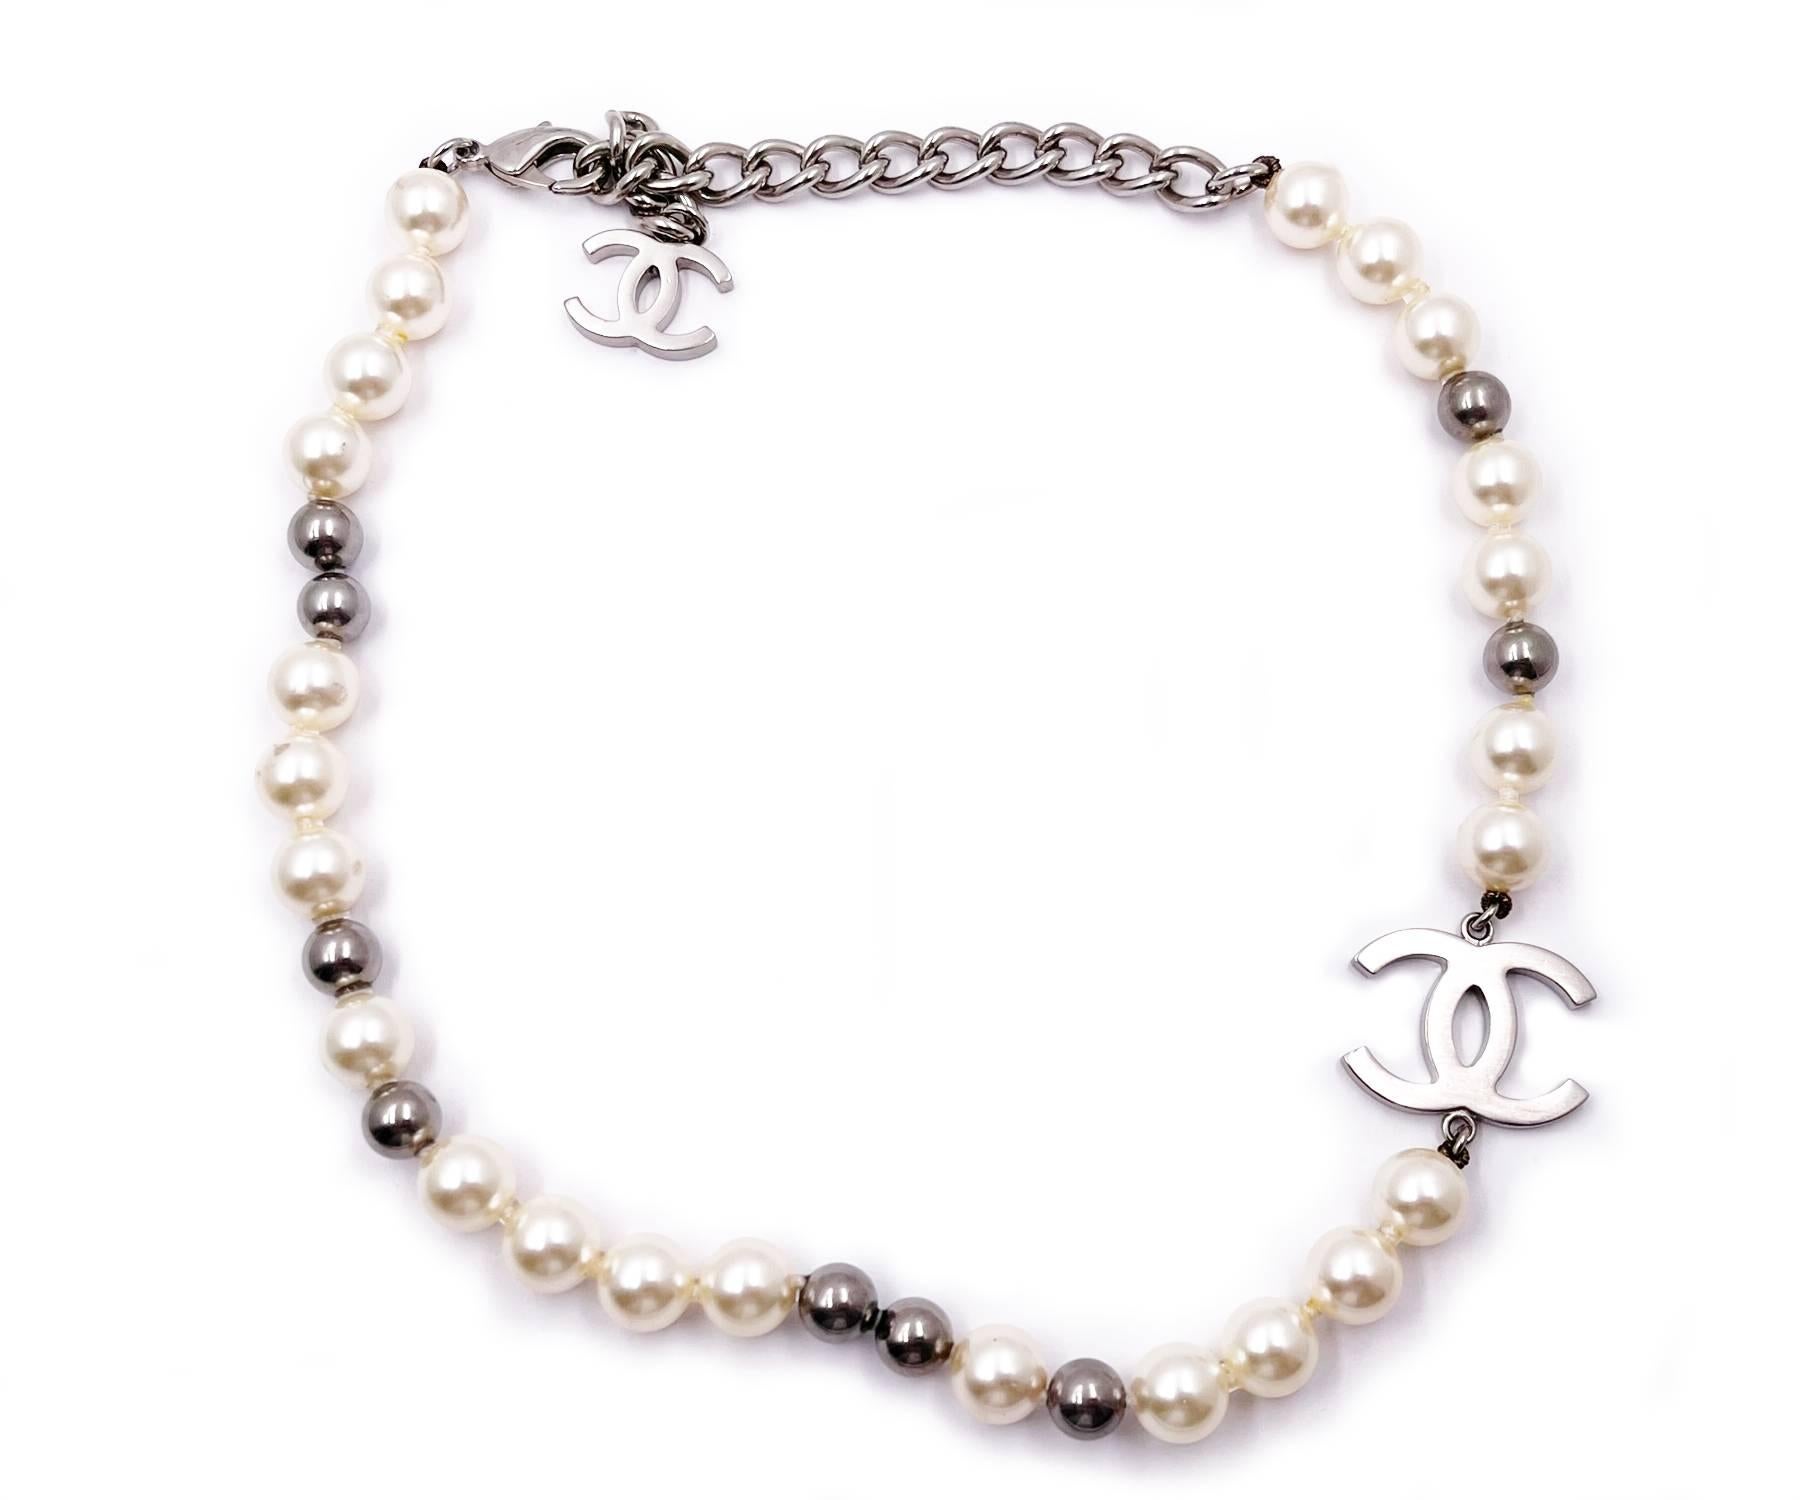 Chanel Silver CC Grey Bead Pearl Short Necklace

*Marked 16
*Made in Italy
*Comes with the original box and ribbon

-Approximately 19″ total length.
-The largest pendant is approximately 1 x 0.75″.
-Very classic and shiny
-In a pristine